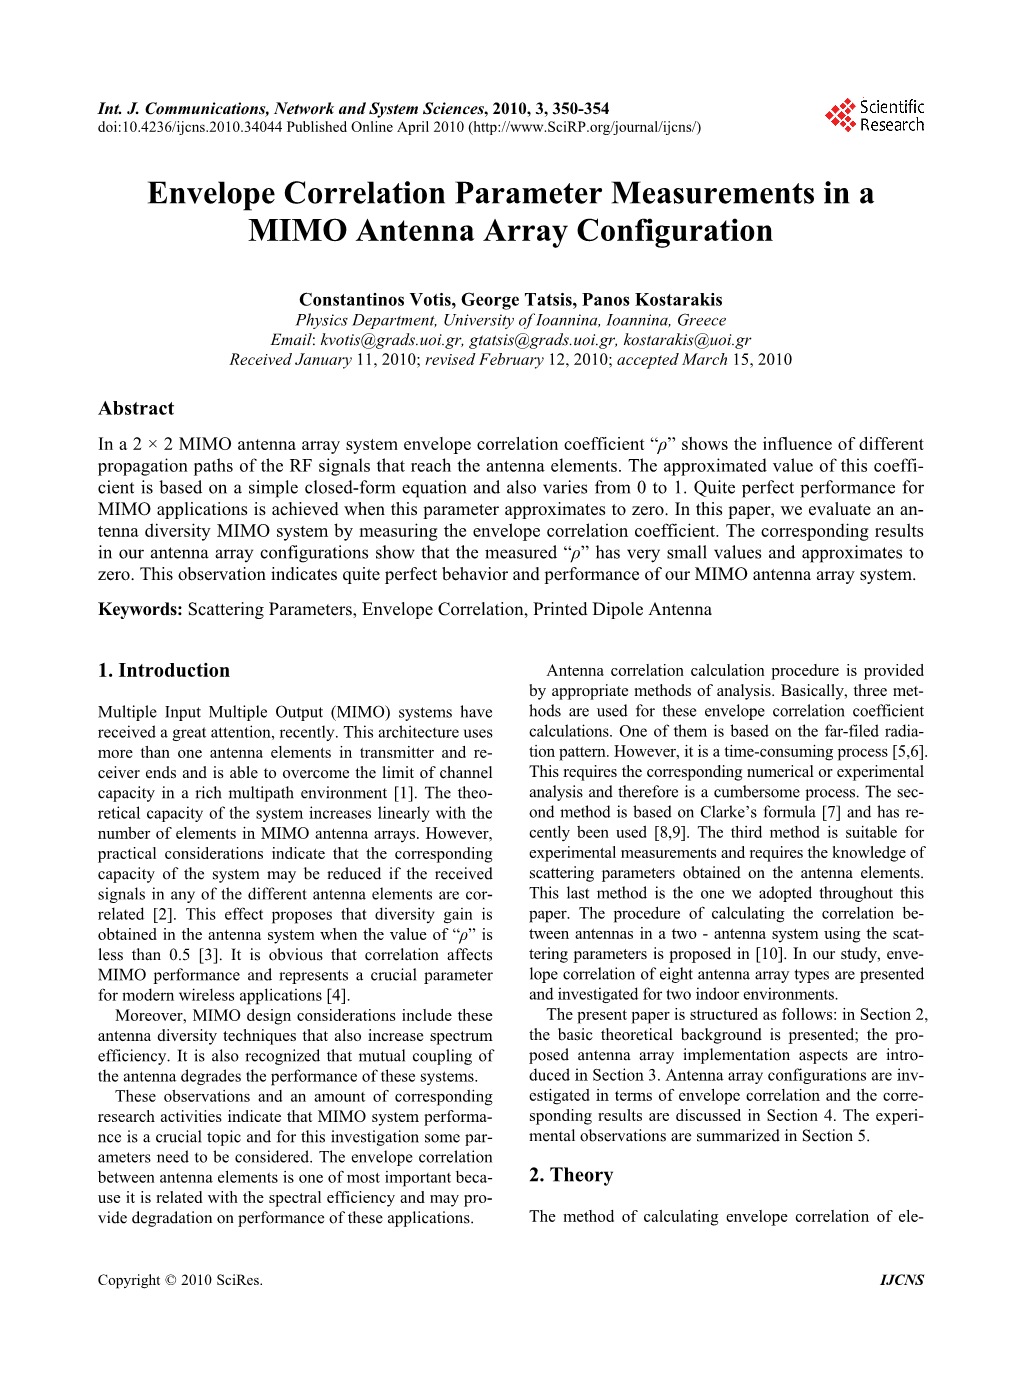 Envelope Correlation Parameter Measurements in a MIMO Antenna Array Configuration